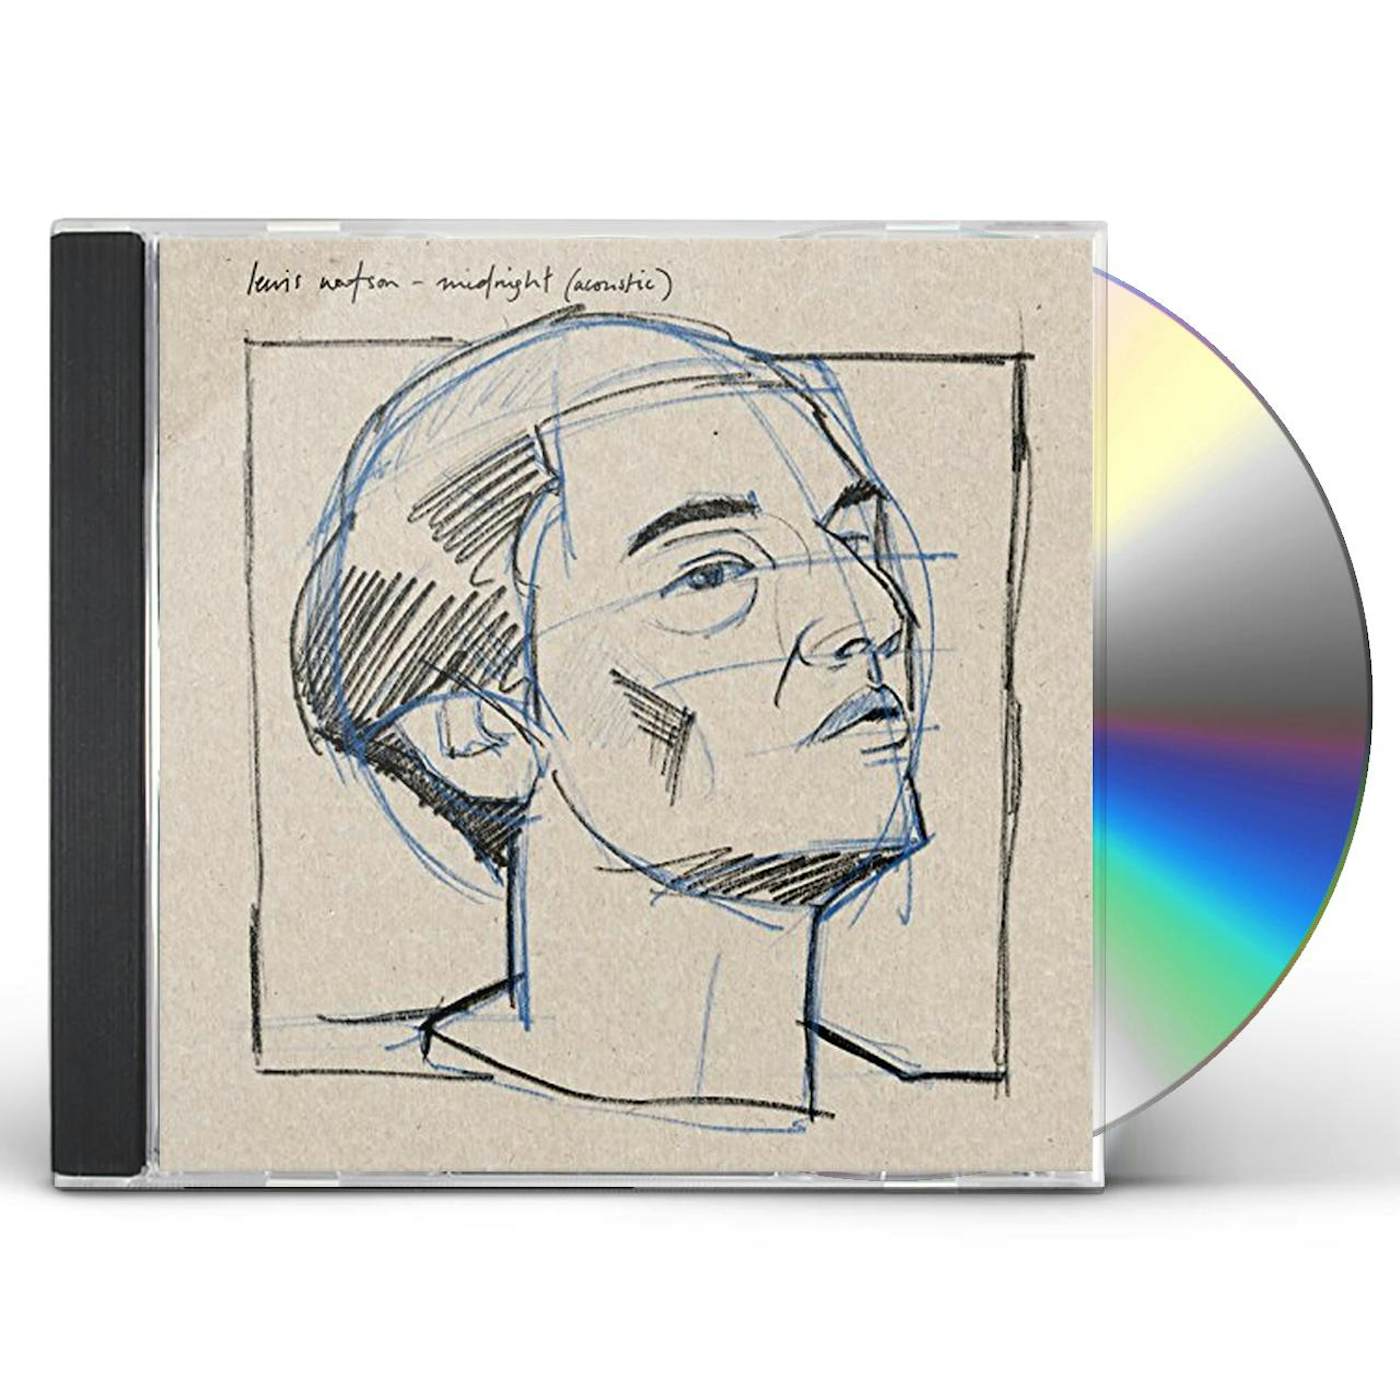 Lewis Watson MIDNIGHT (ACOUSTIC) CD